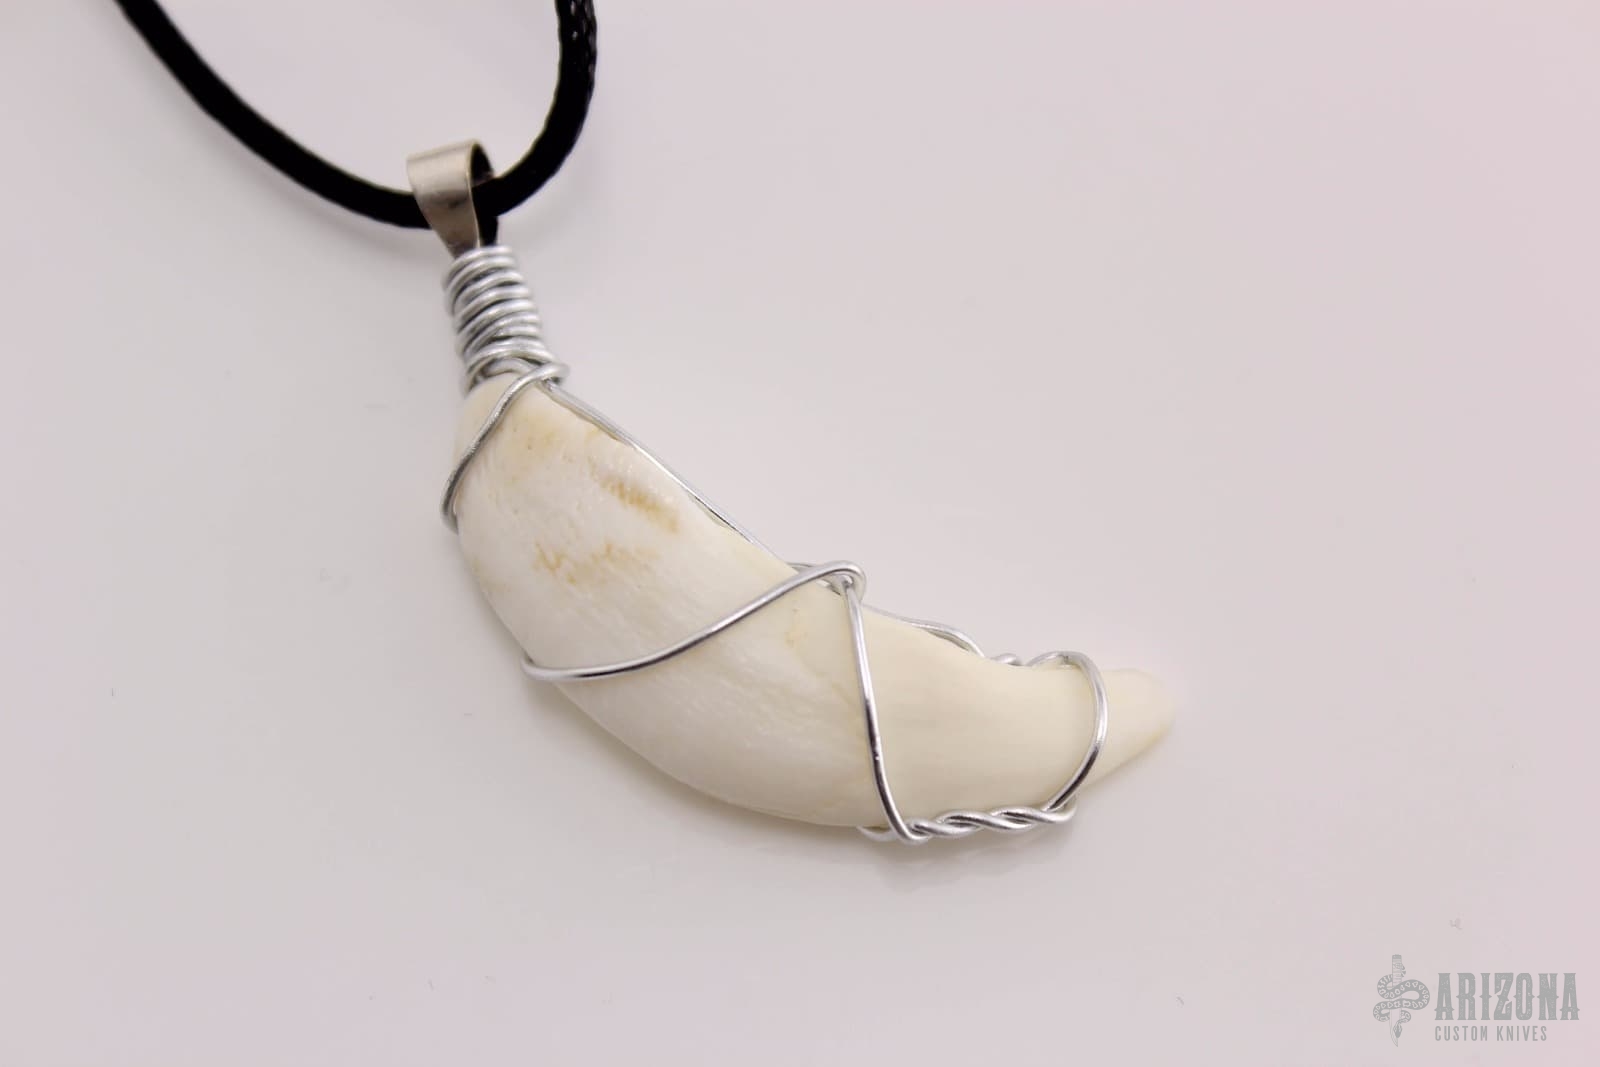 Tribal Style Large Wild Boar Tooth Tusk Charm Amulet Pendant Necklace  Adjustable 56mm Long | Wish